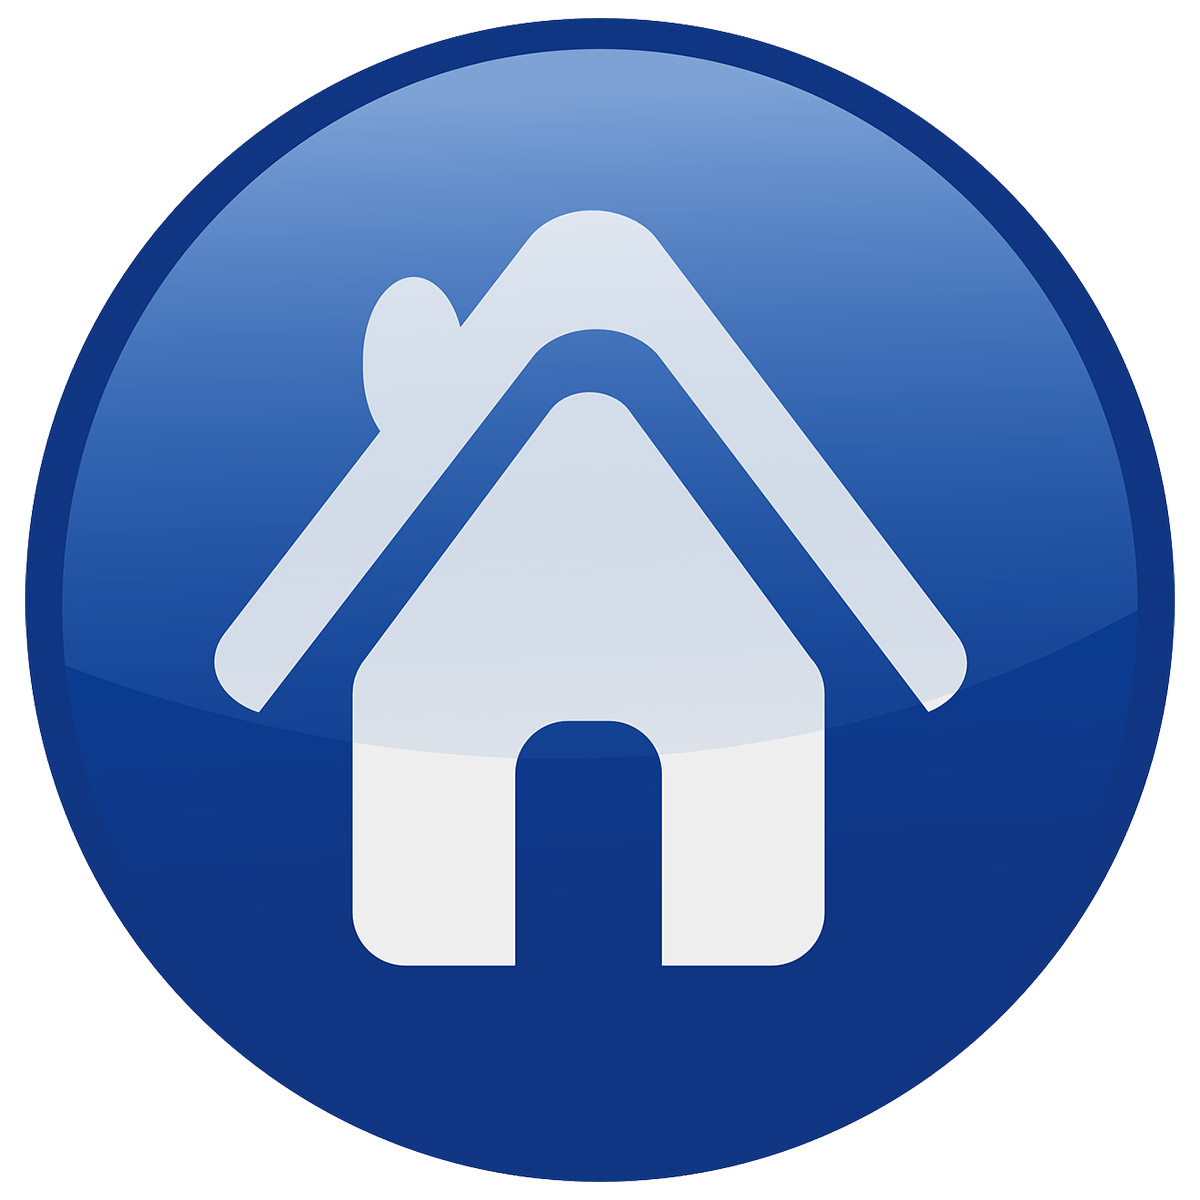 A blue circle representing a touch button with a graphic of a home in the center.